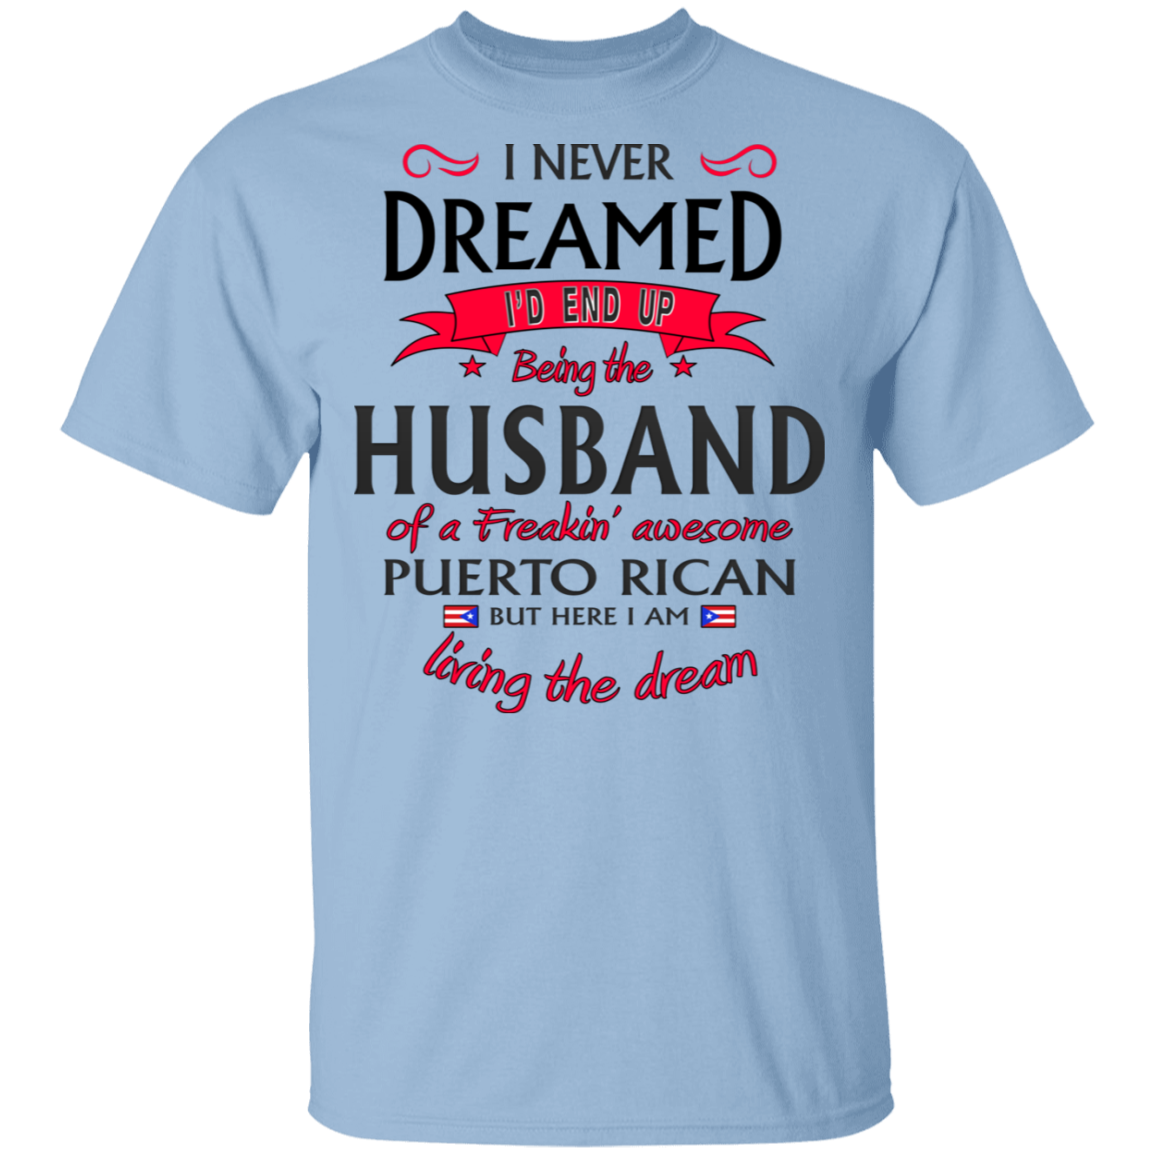 Husband of Awesome PR 5.3 oz. T-Shirt - Puerto Rican Pride